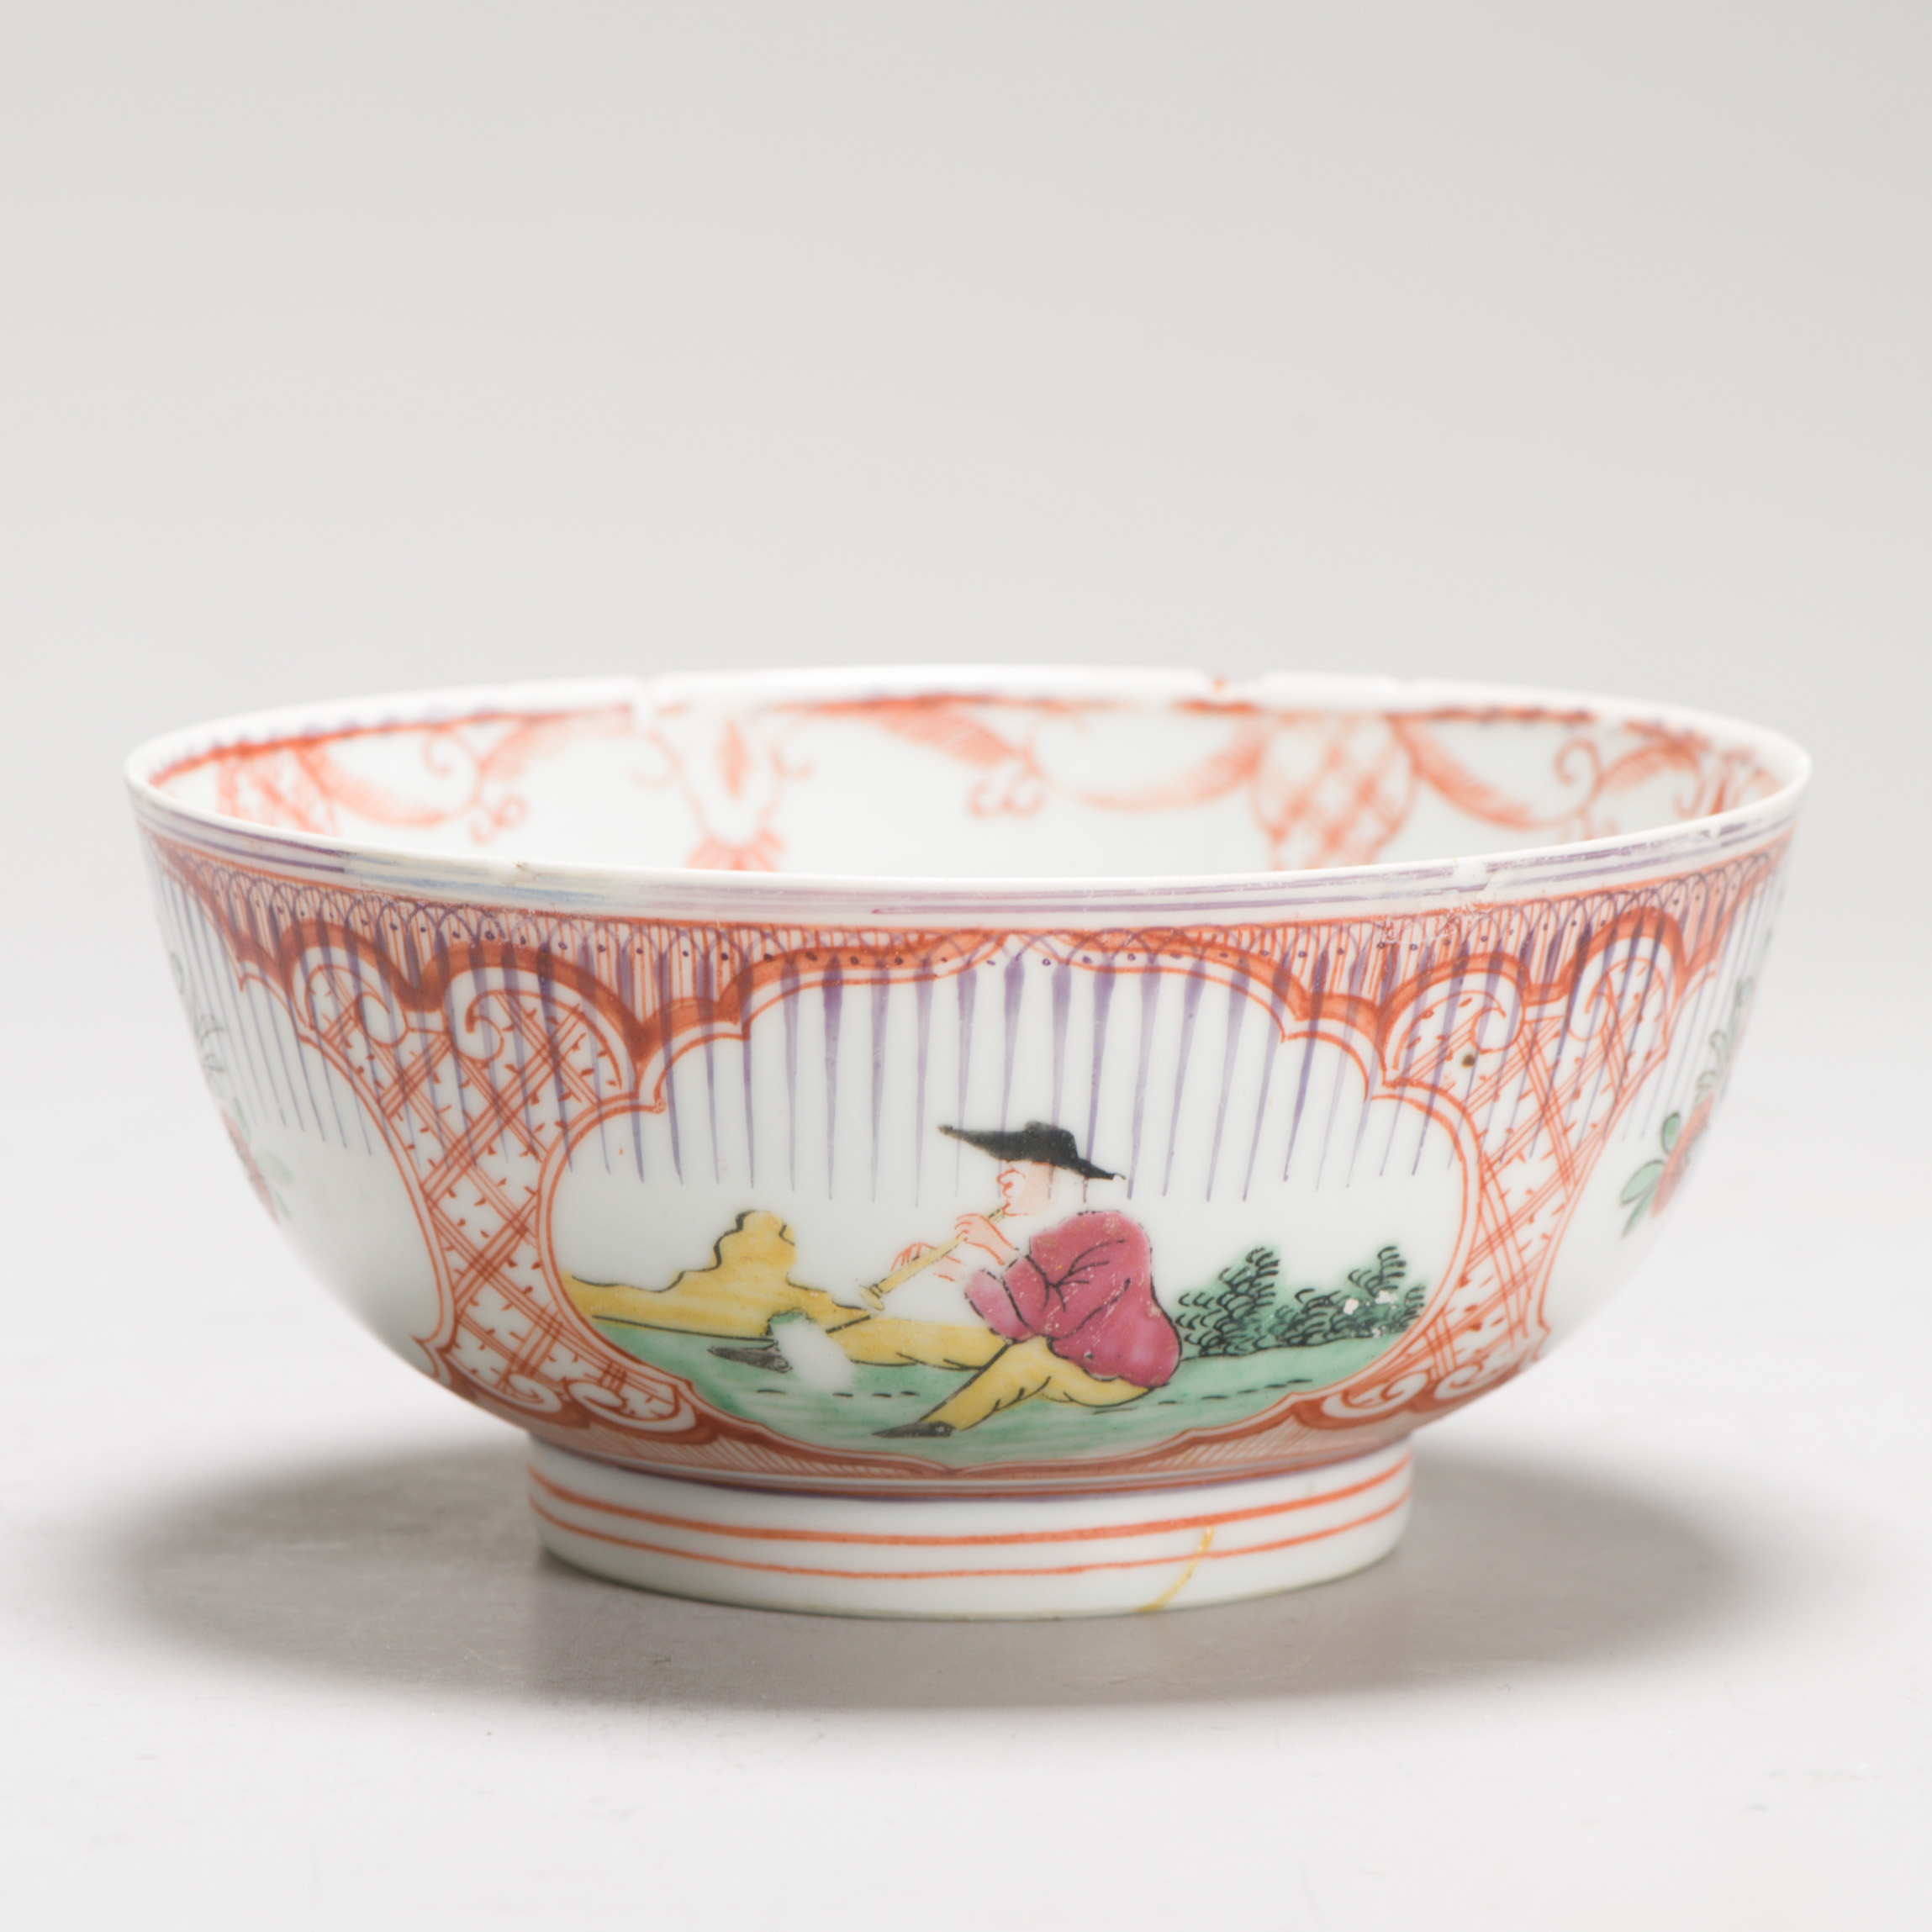 1249 An Amsterdam Bont bowl decorated in red, green yellow and purple. Surprising decoration